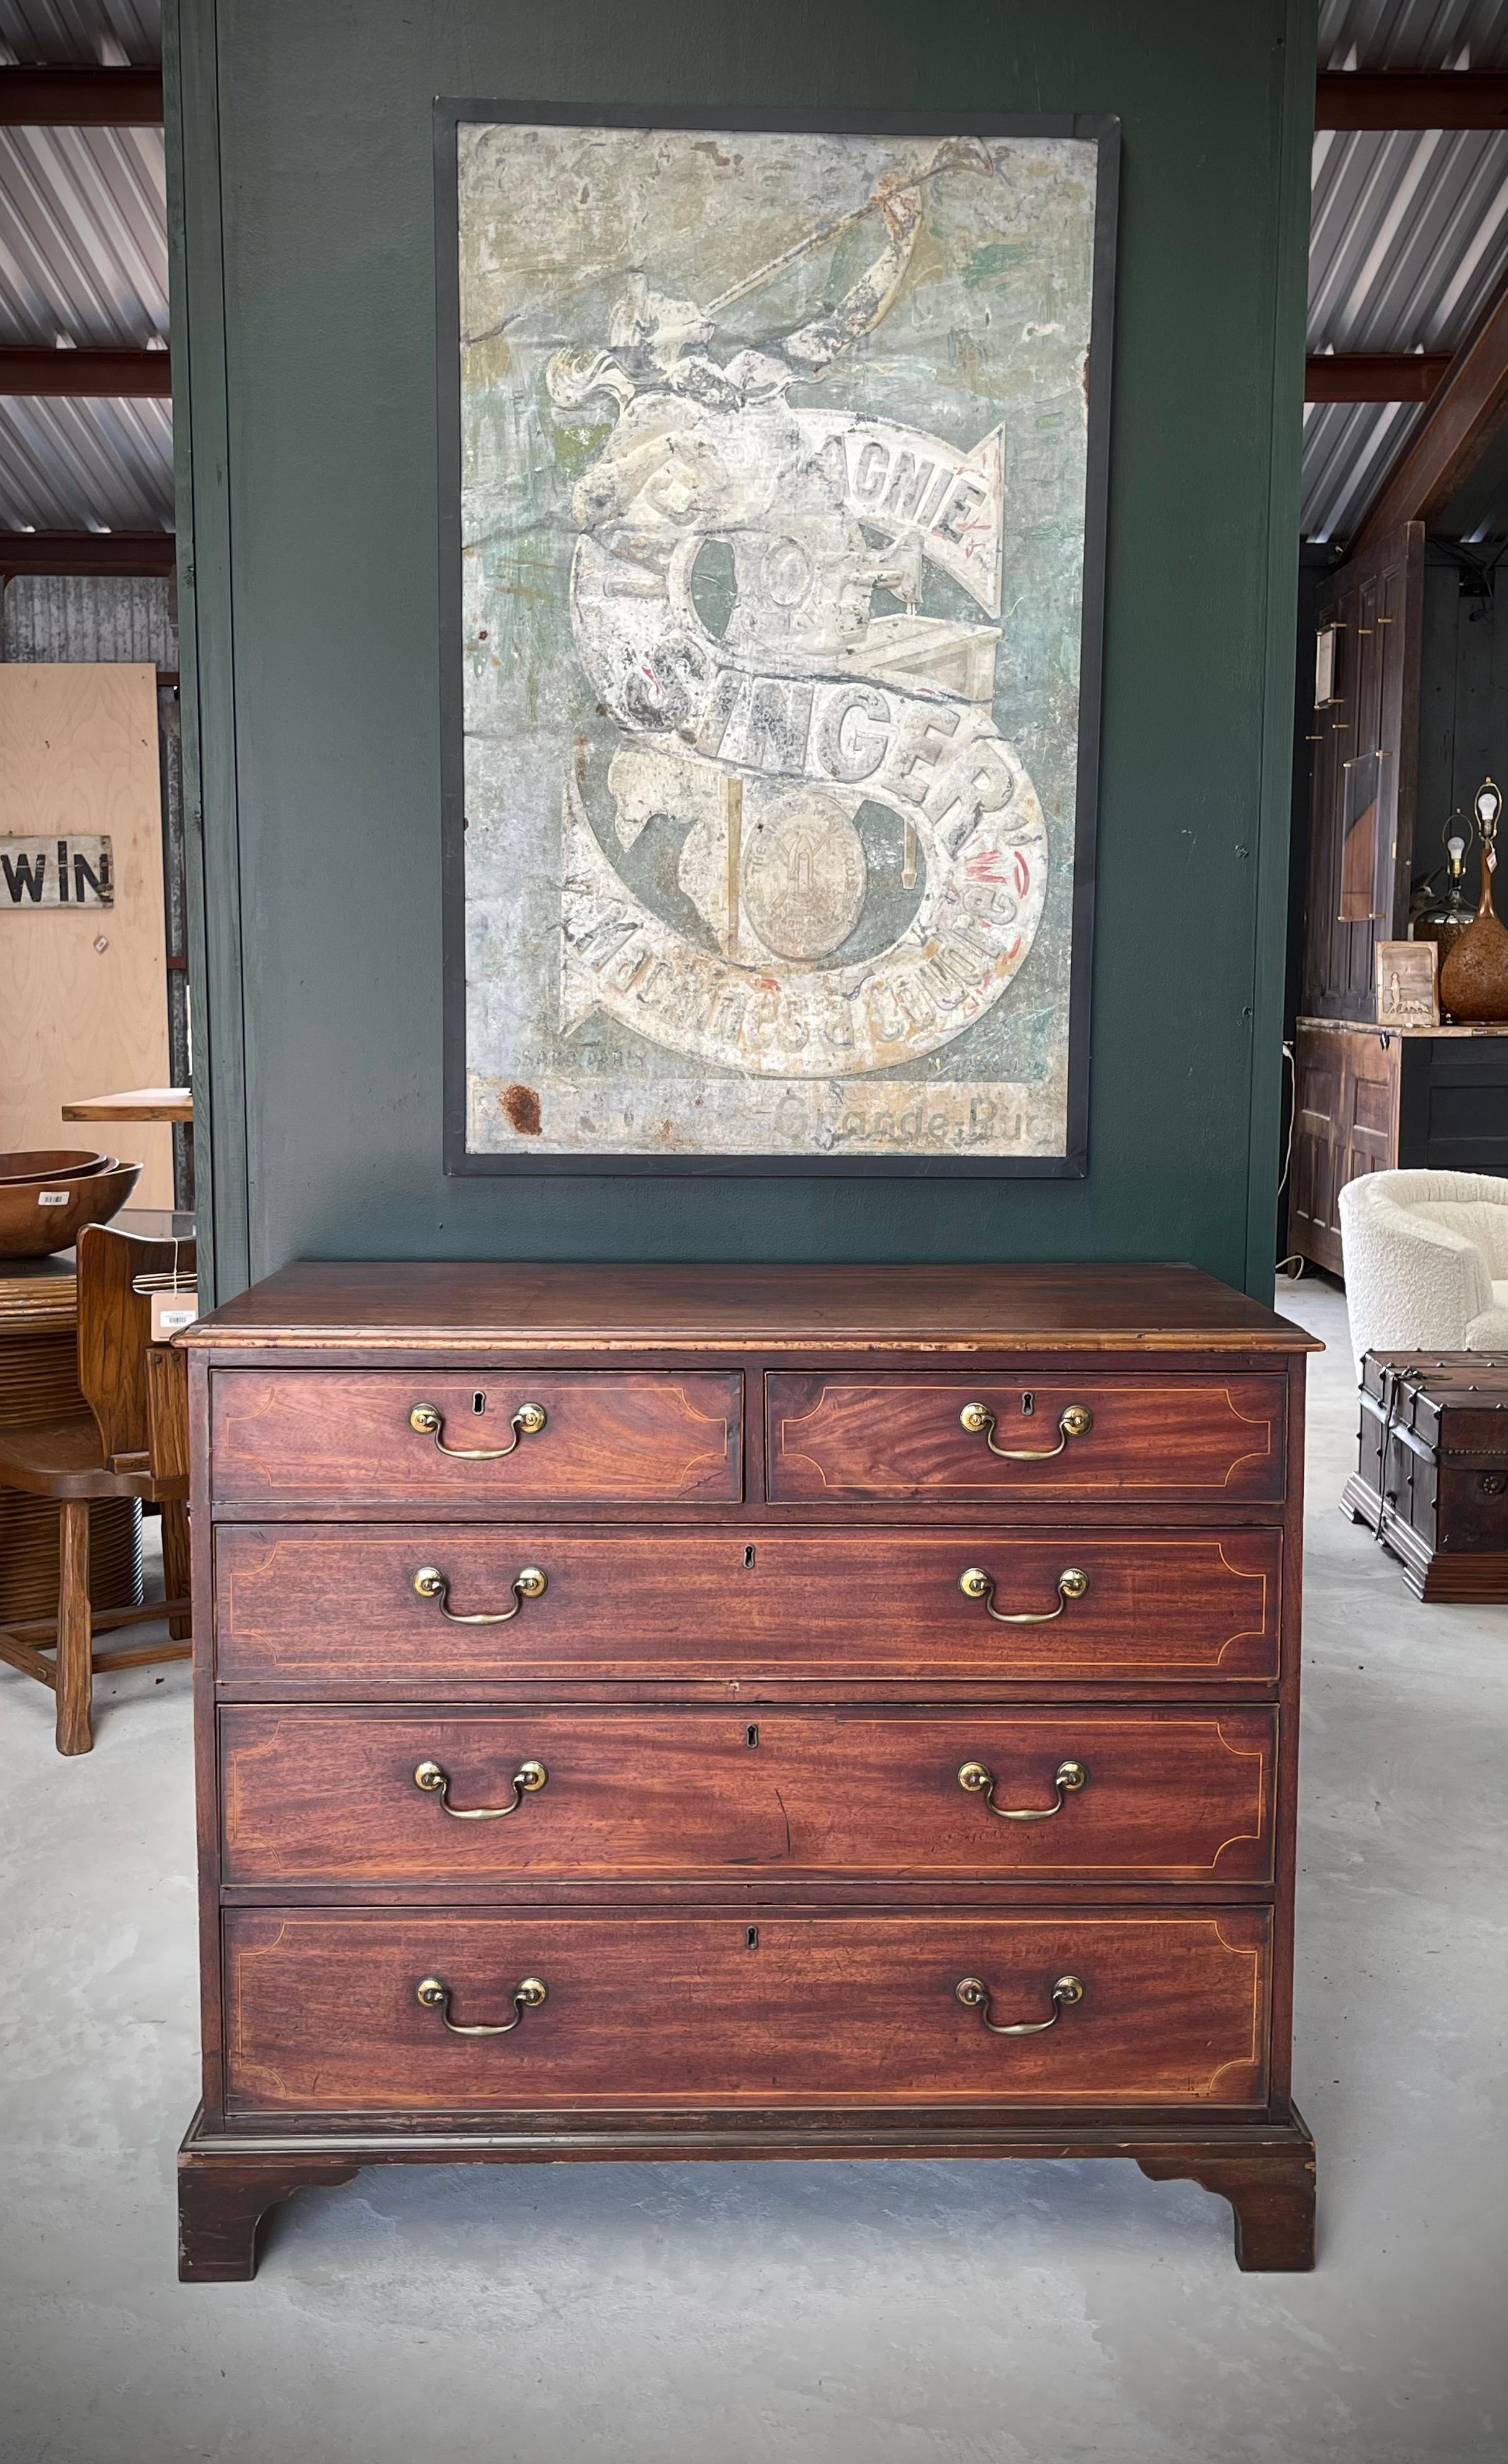 Transport yourself back in time with this remarkable English late 18th-century Georgian chest of drawers. Constructed with care, it embodies the essence of meticulous English traditional craftsmanship. Adorned with intricate mahogany inlay detailing